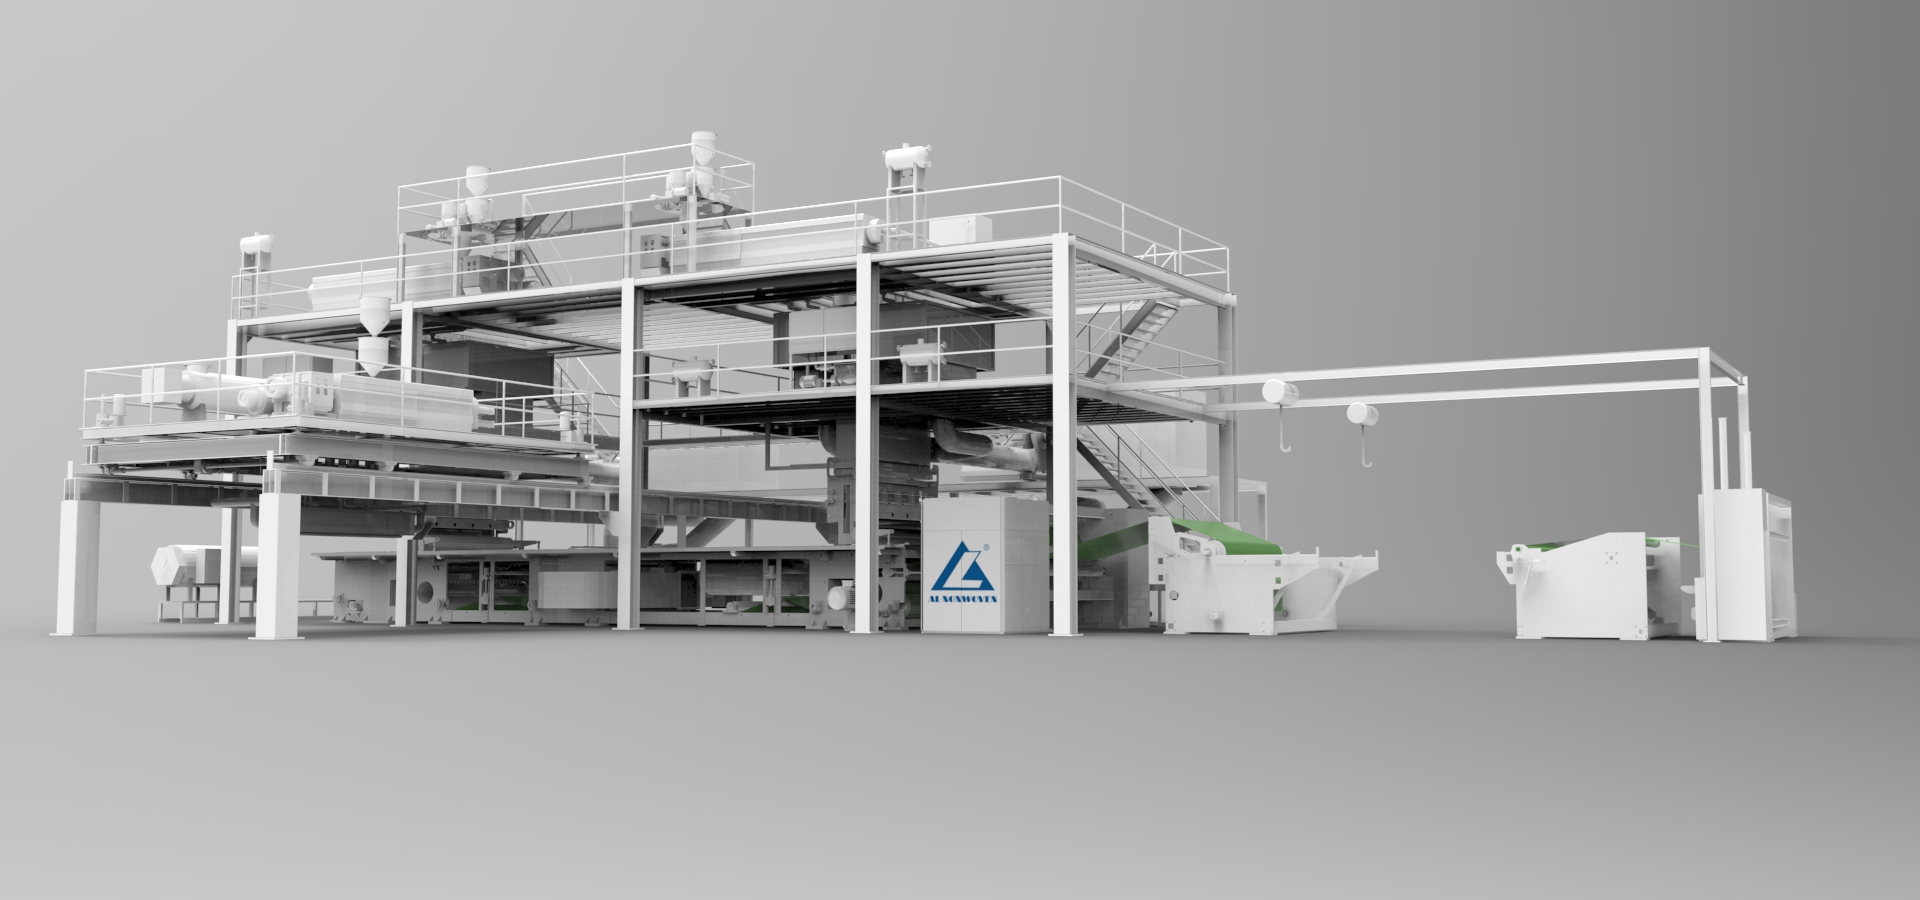 AL--2400mm SMS PP Spunbond Medical /Health Nonwoven Fabric Making Machine 